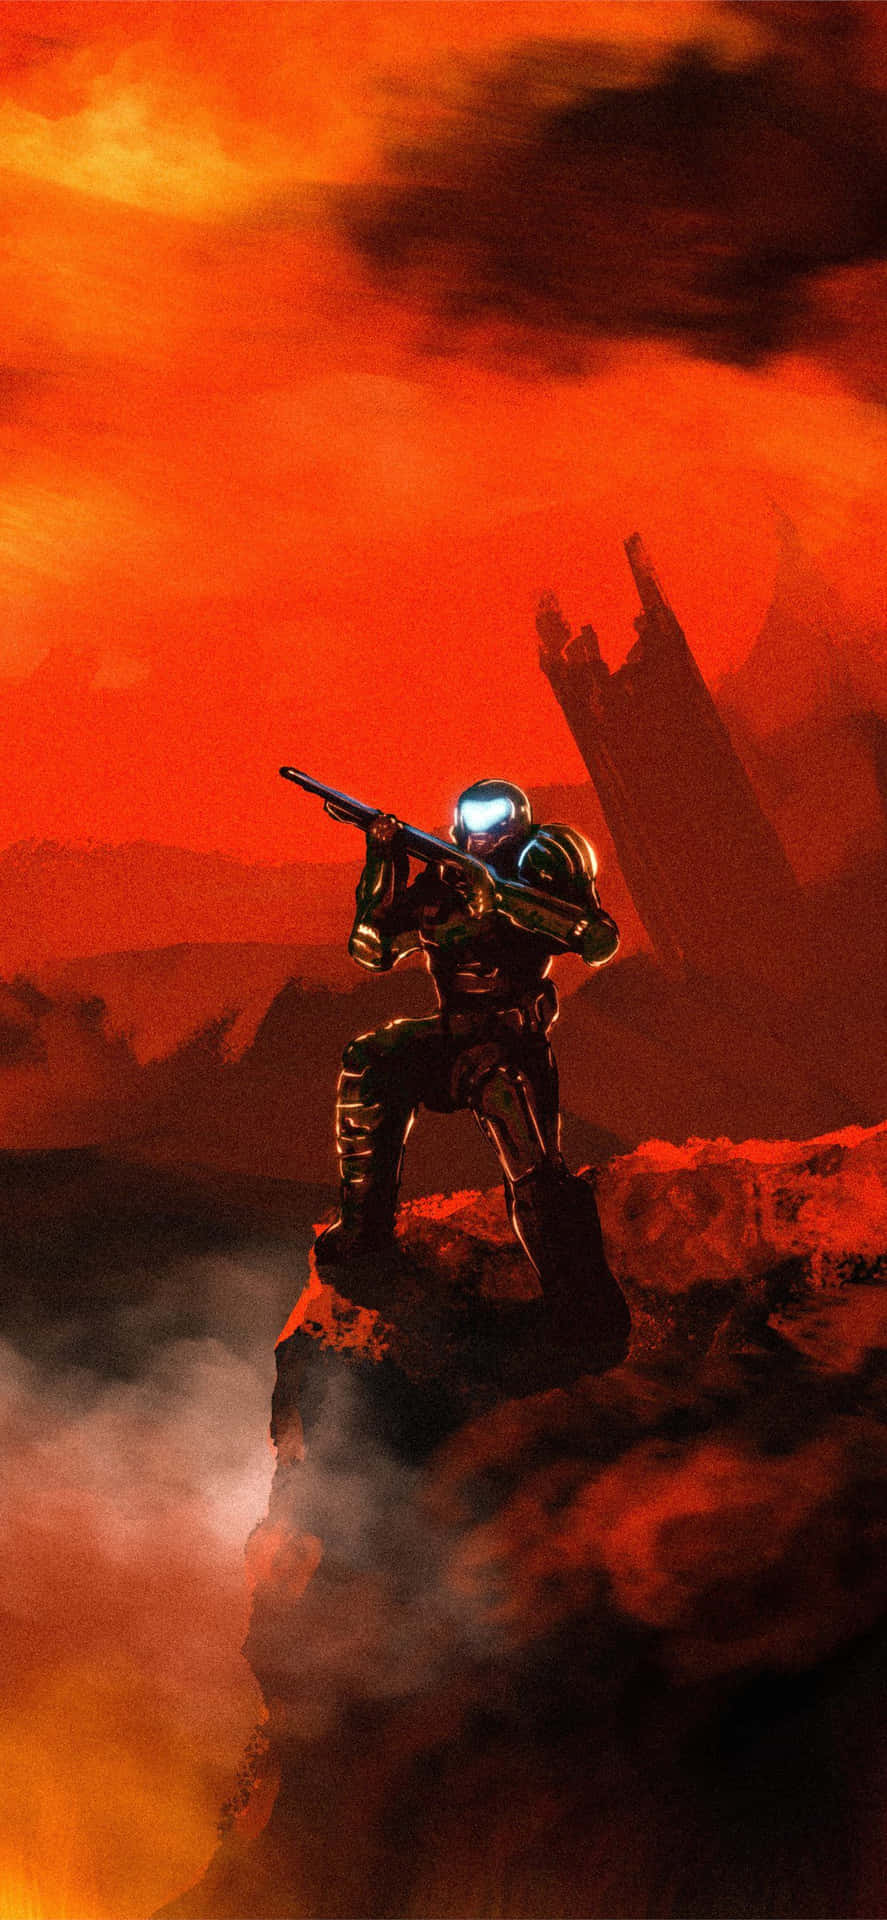 Outrun The Demons On The New Doom Iphone Background